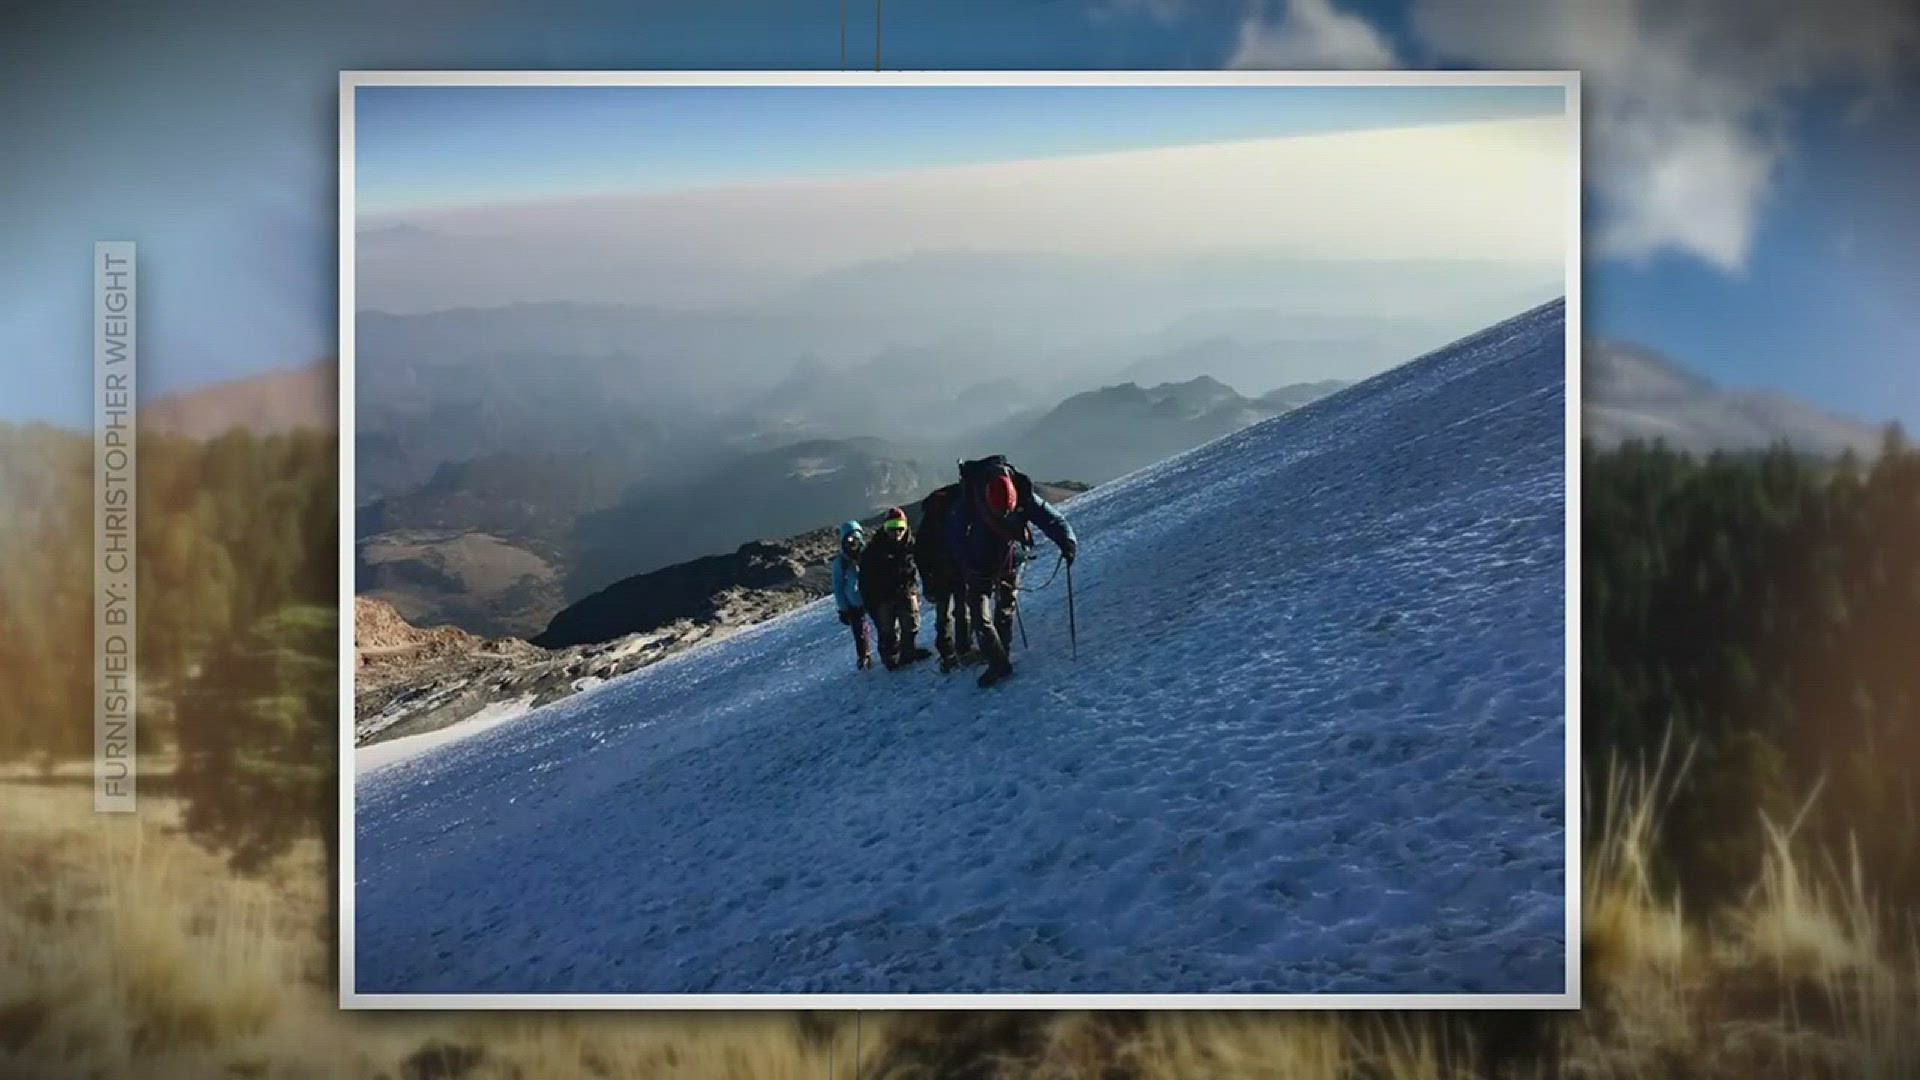 Dr. Christopher Weight led a group of up Mexico's tallest mountain, Pico de Orizaba, in an effort to raise funds for cancer awareness and research.